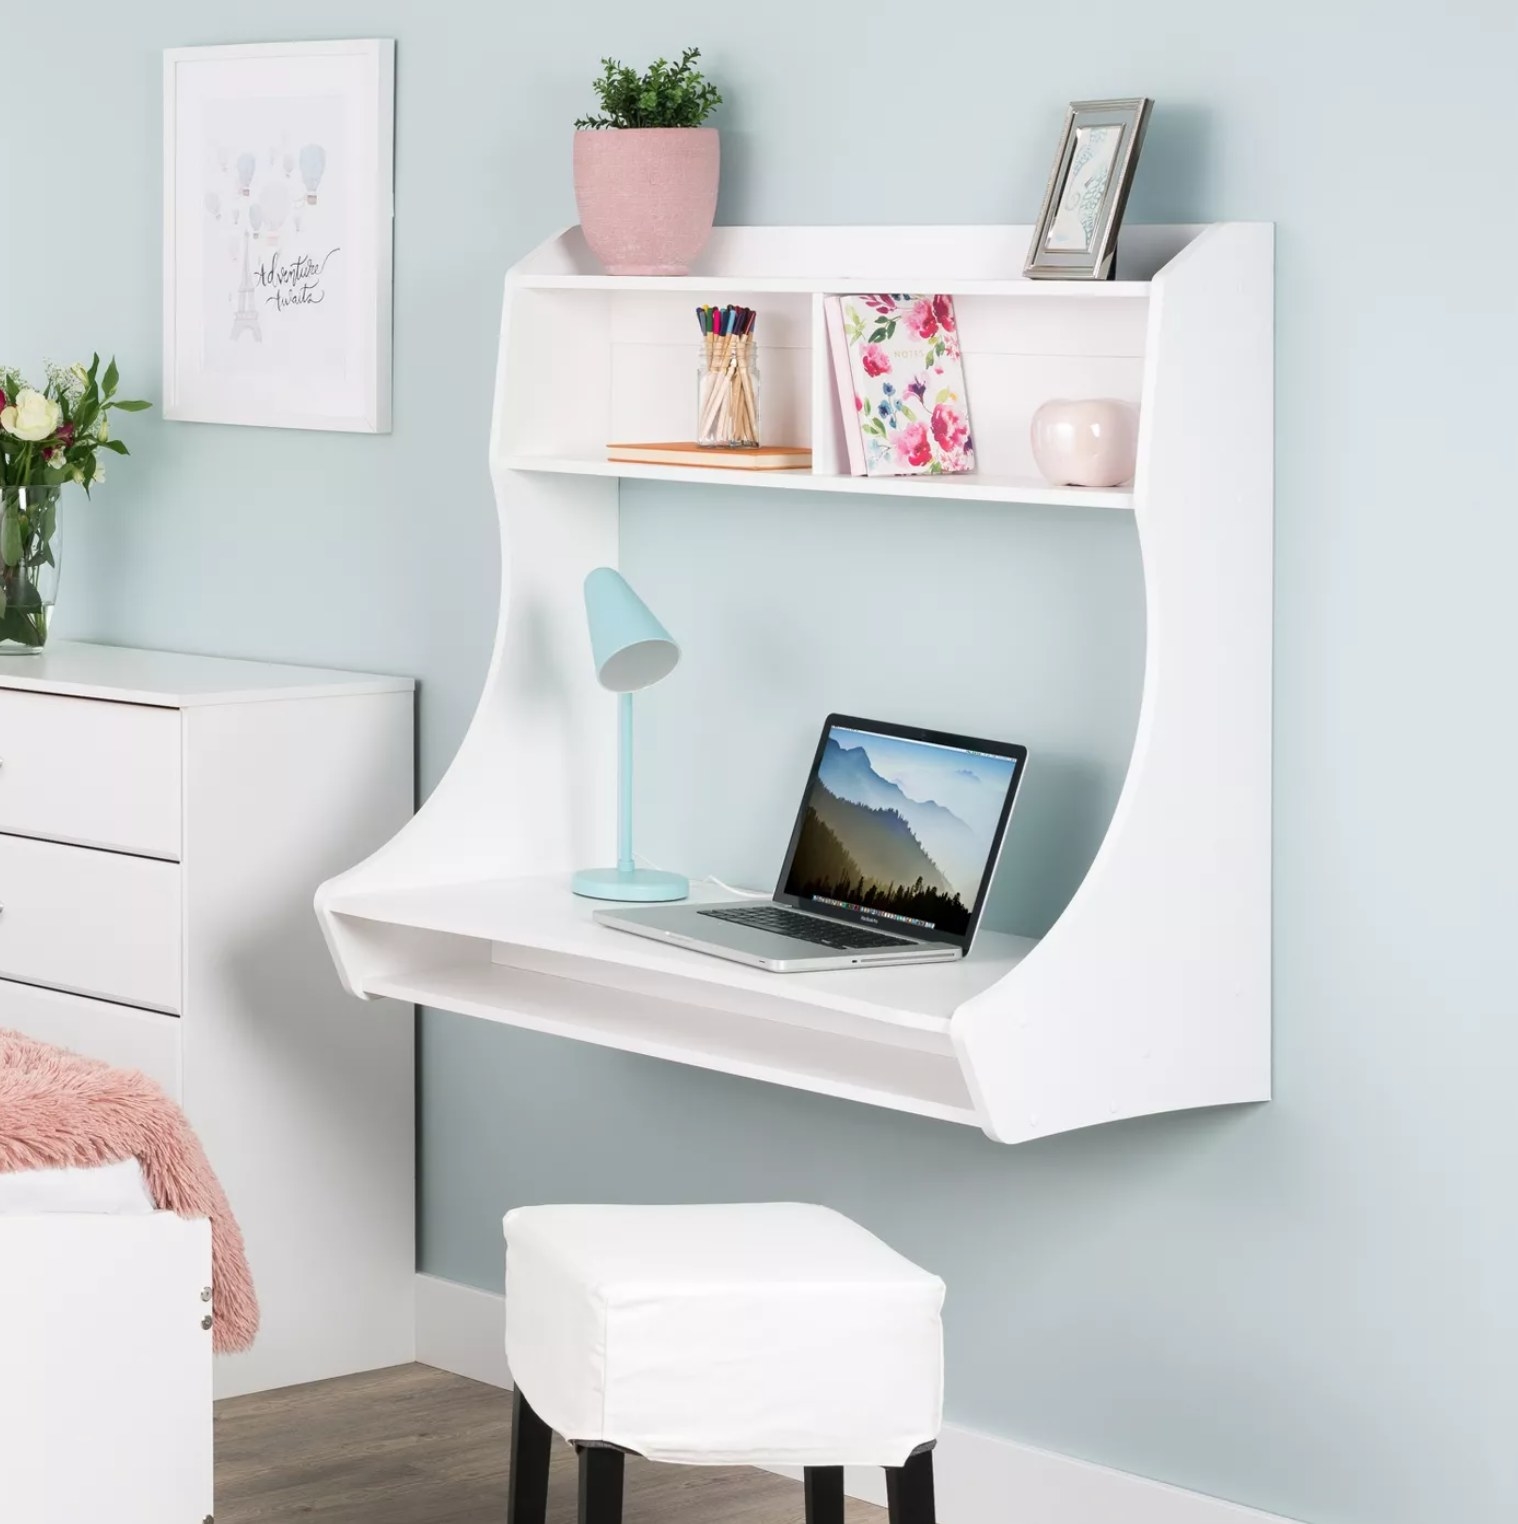 The white wall-mounted desk with a laptop and lamp on it